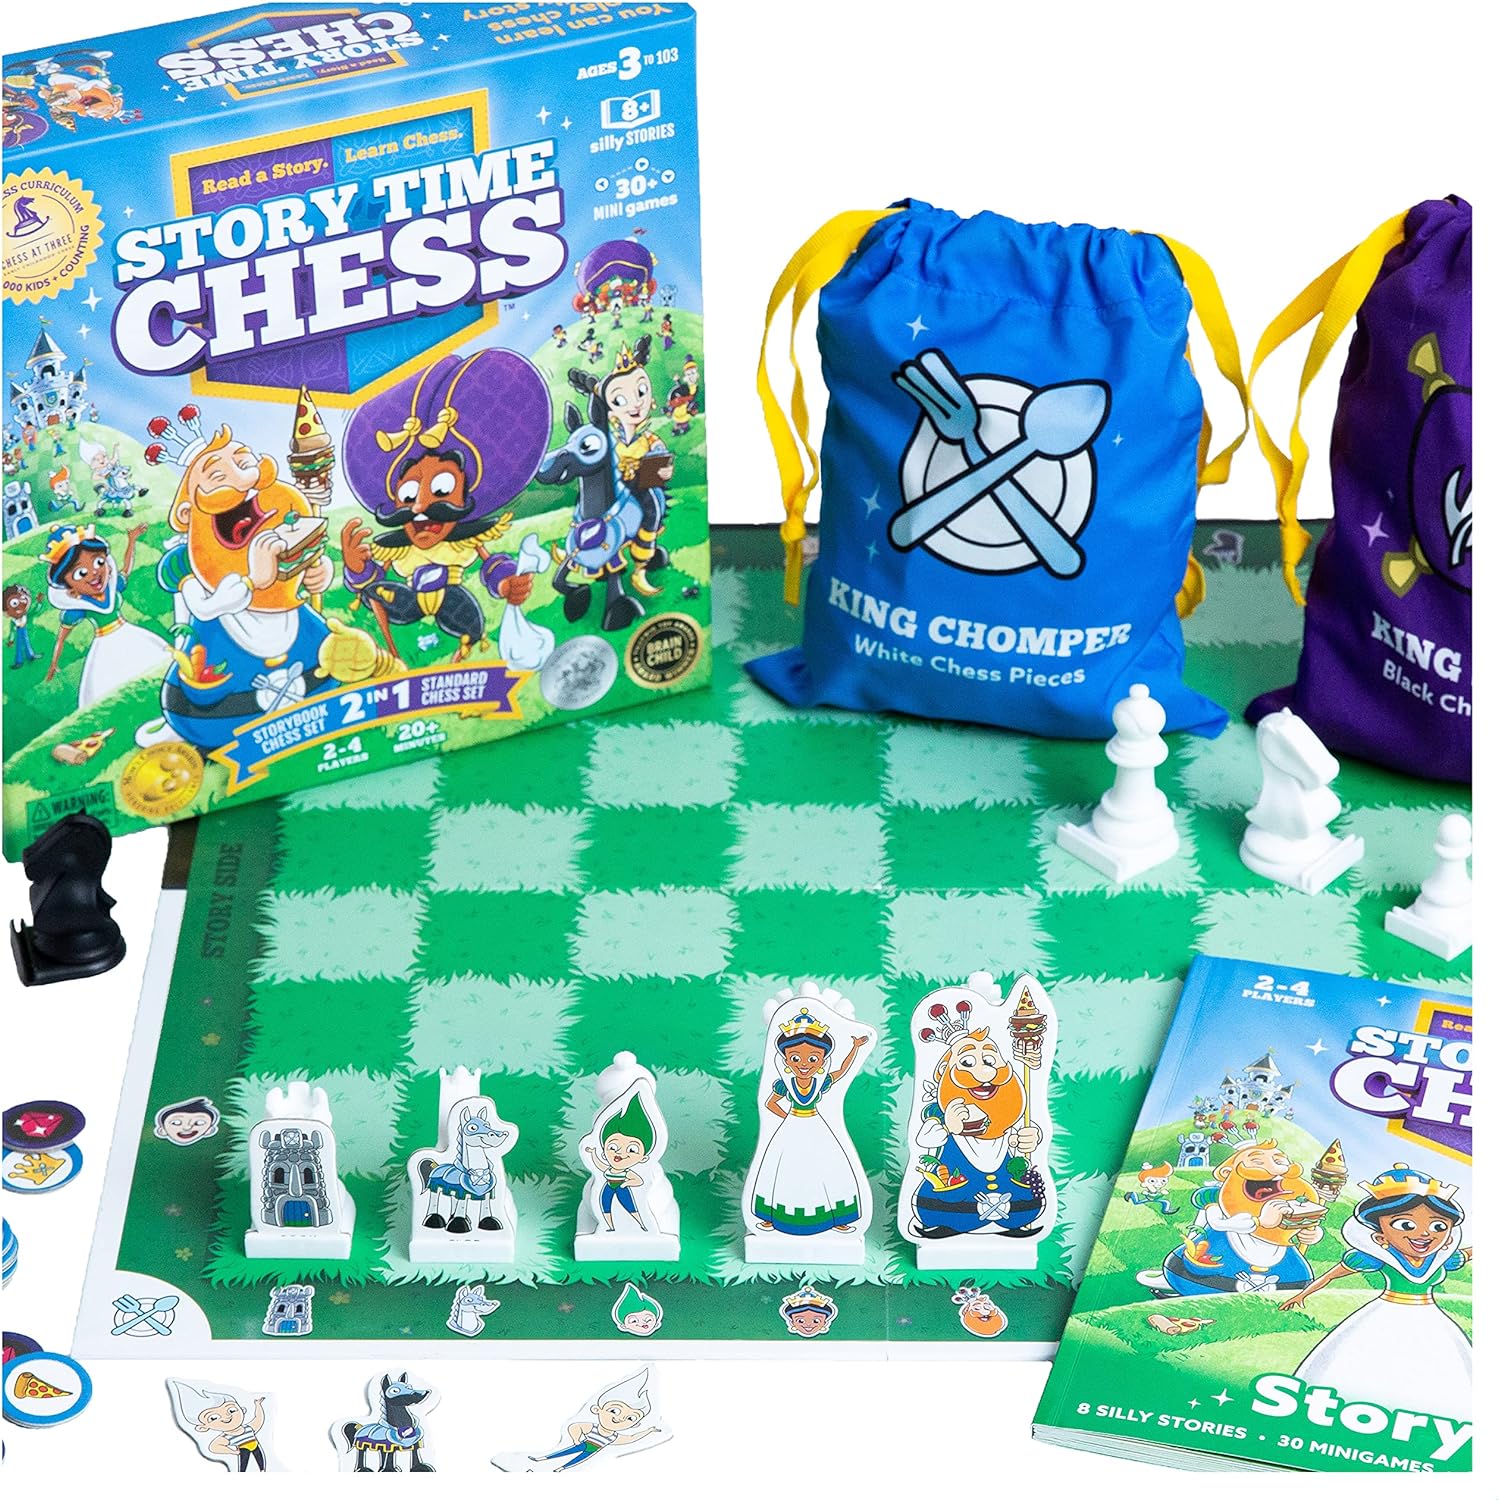 2021 Toy of The Year Award Winner – Chess Sets, Beginners Chess, Chess Game Toddlers, Learning Games for Kids, Boys & Girls Ages 3-103